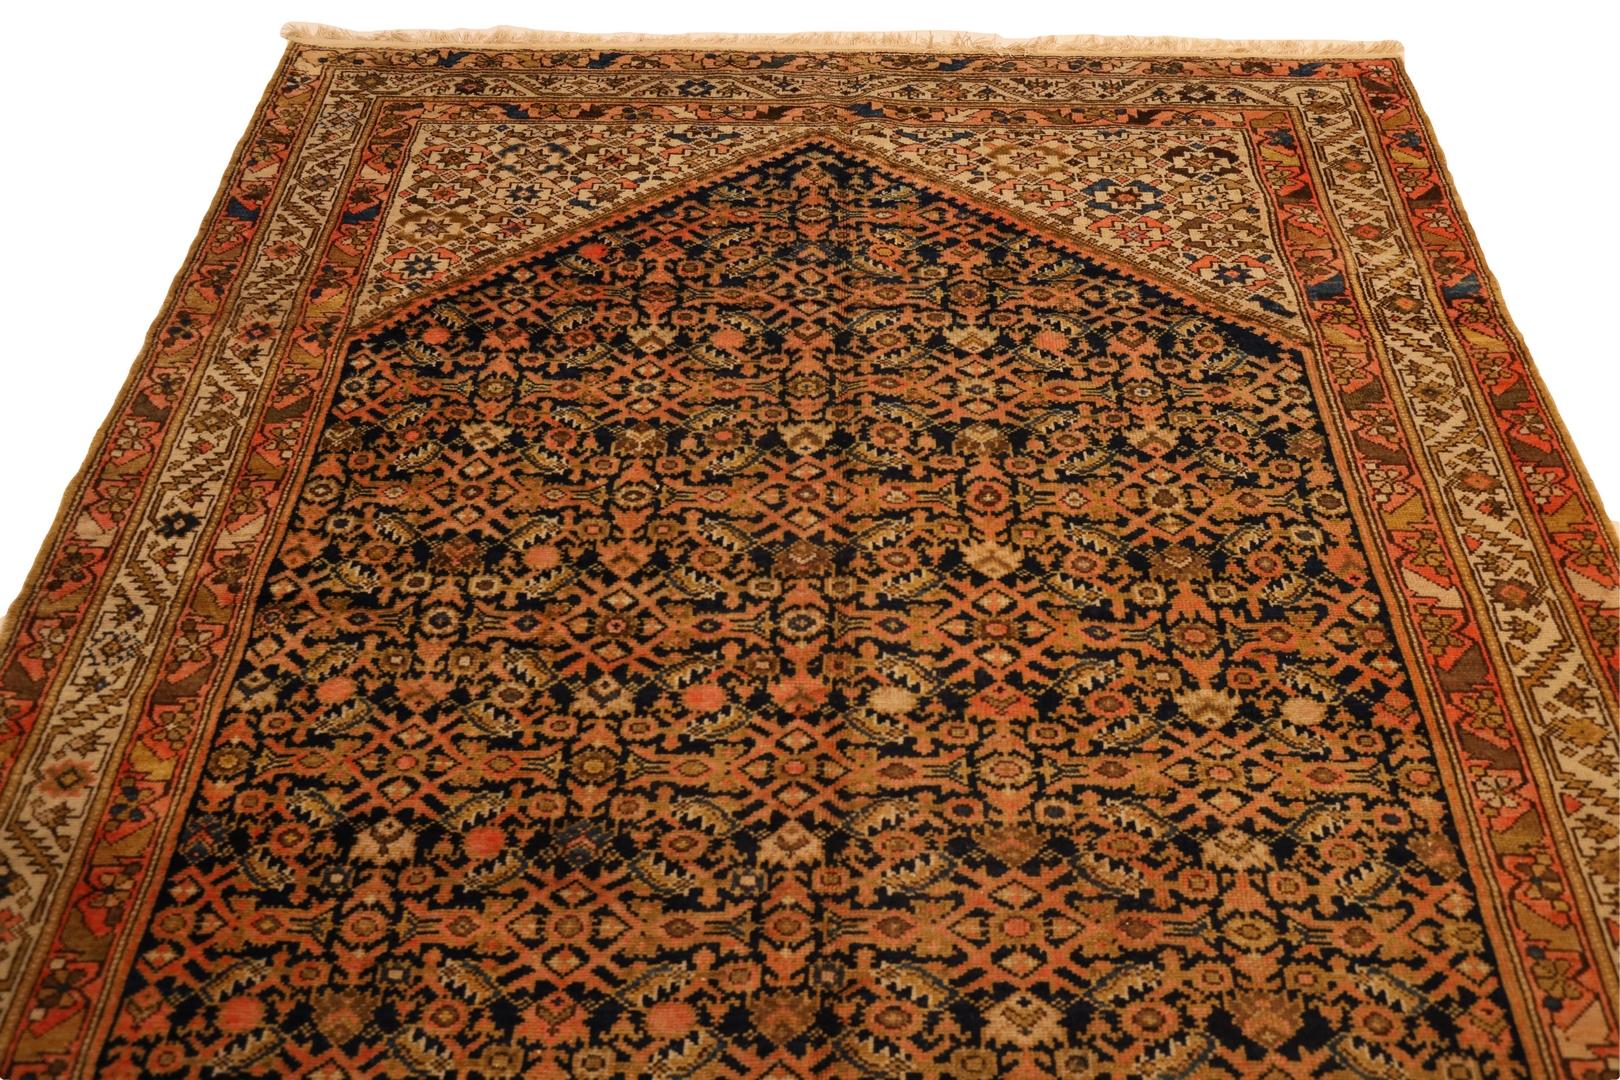 20th Century Malayer Semi-Antique Gallery Size Rug, Red Ivory Navy - 7 x 18 For Sale